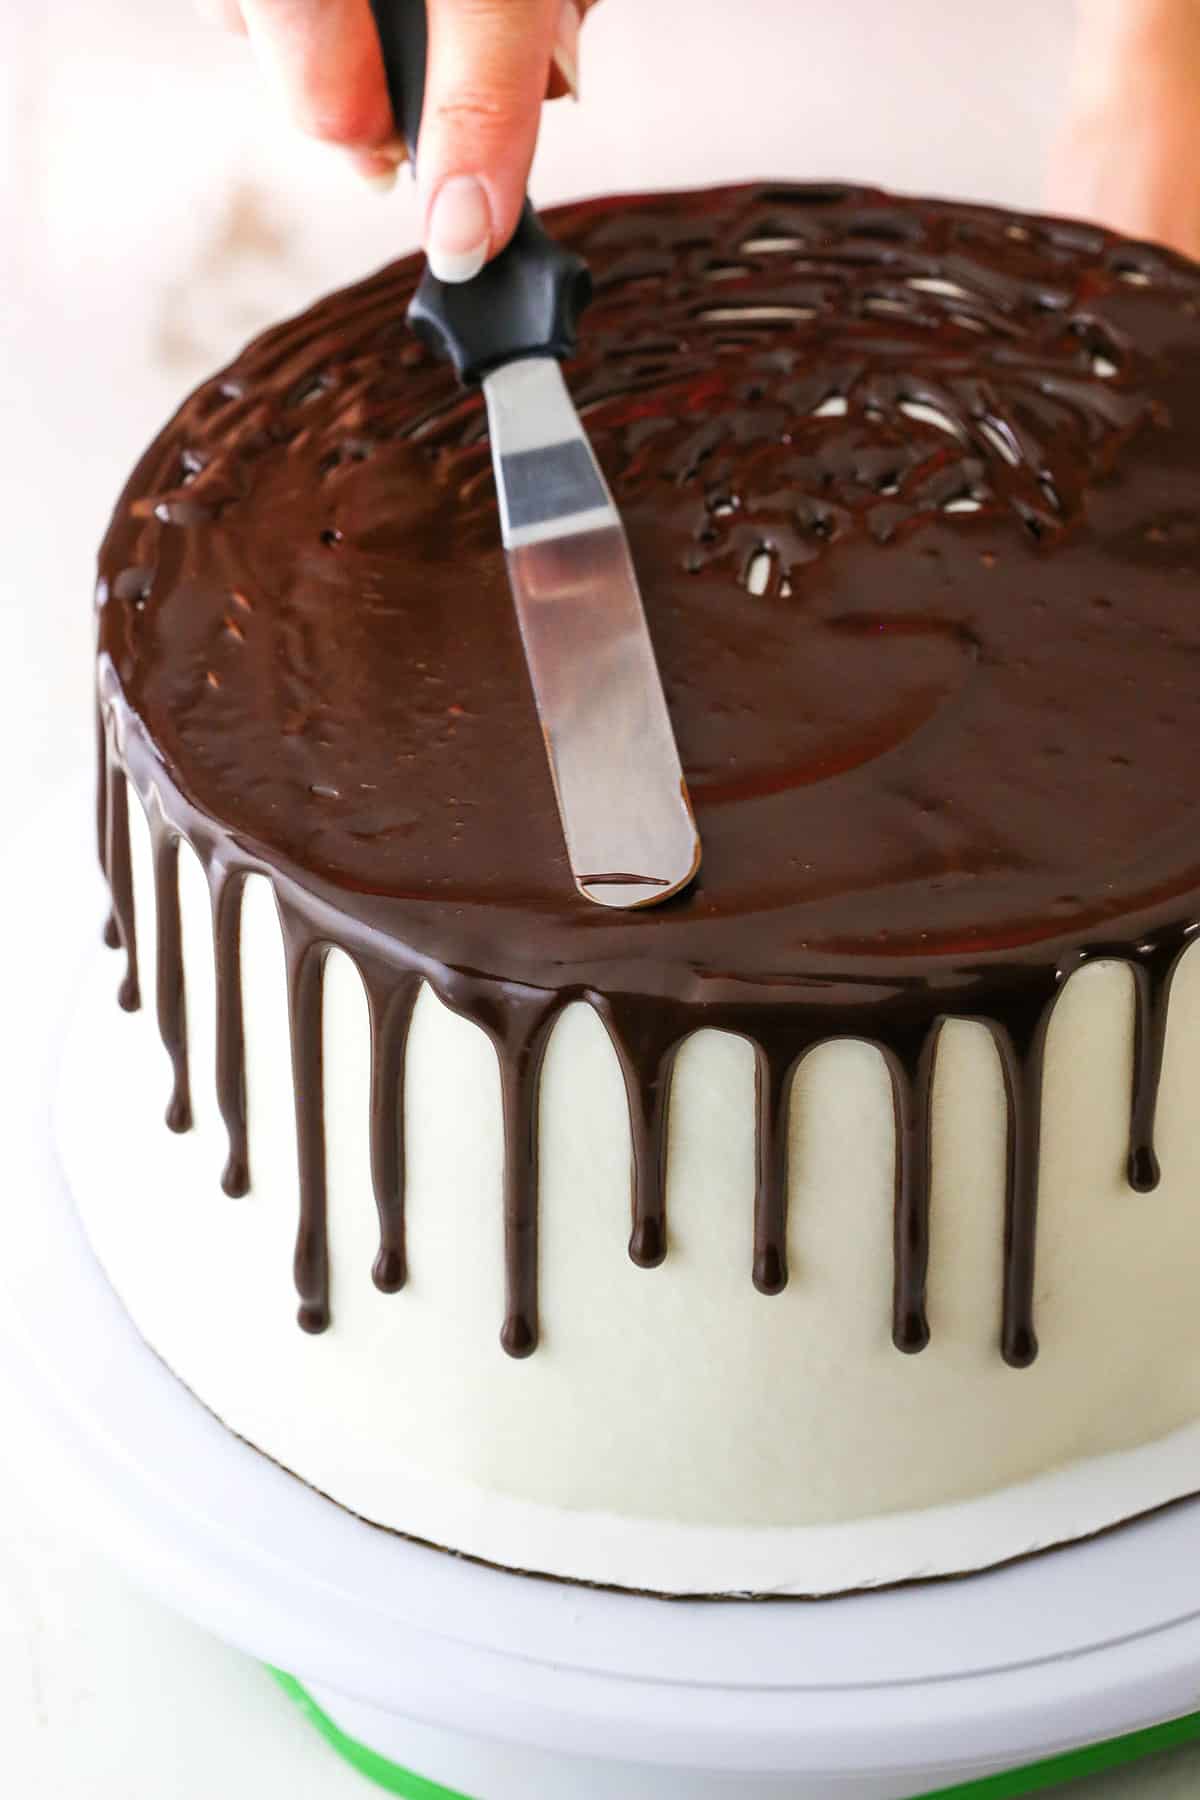 How to Make a Chocolate Drip Cake tutorial showing using an offset spatula to smooth the chocolate ganache on top of the cake